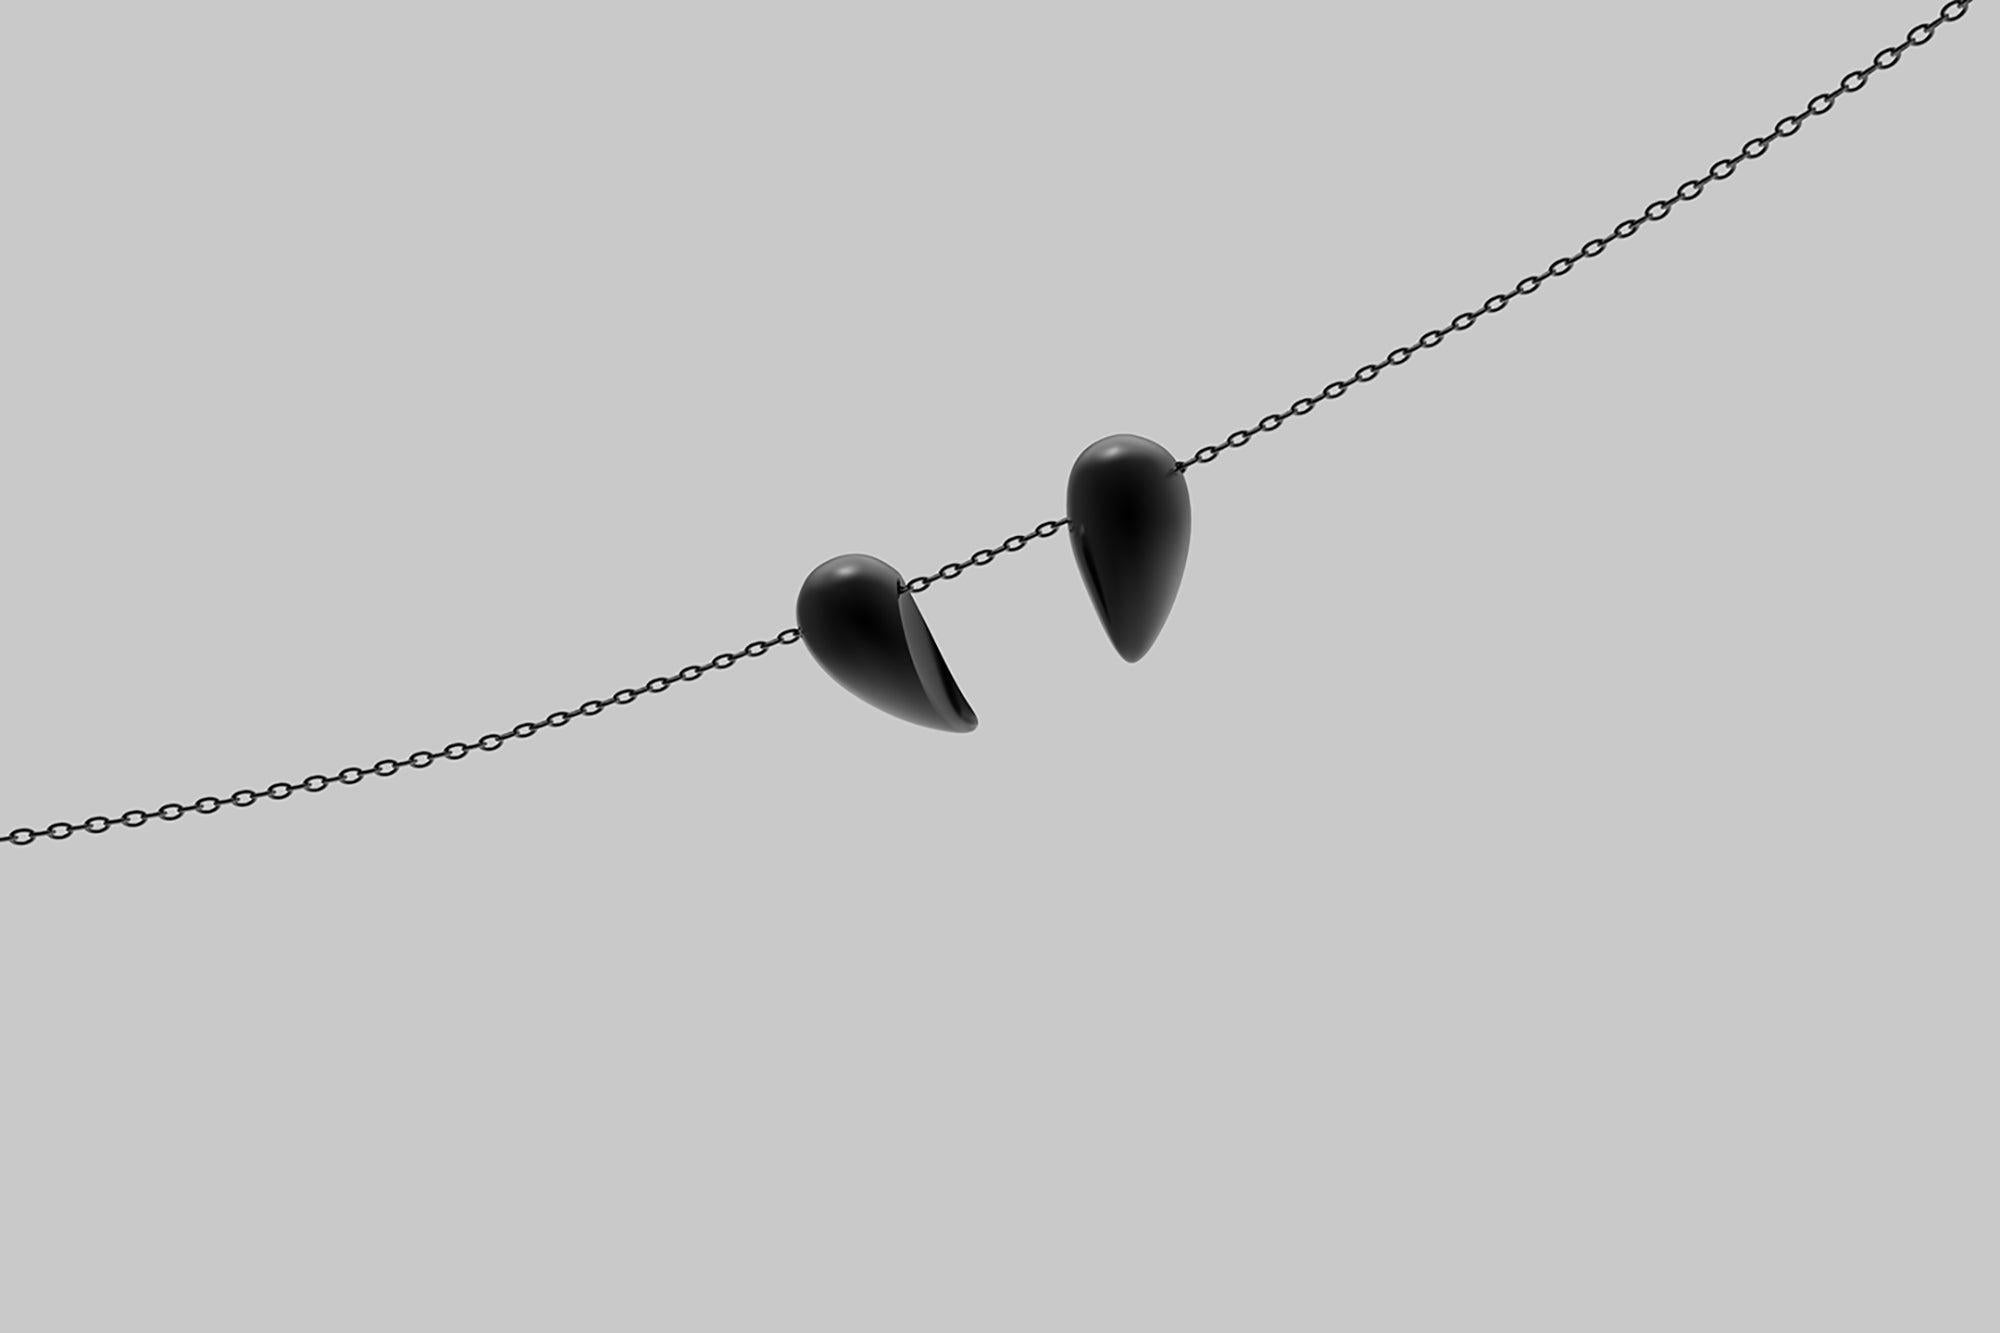 Jacqueline Rabun
'Black Love' Small Pendant
Oxidised Sterling Silver

Two seeds symbolising transformation and change come together to delicately form a sculptural heart symbol, a talisman illustrating the beauty, elegance and grace of the heart of